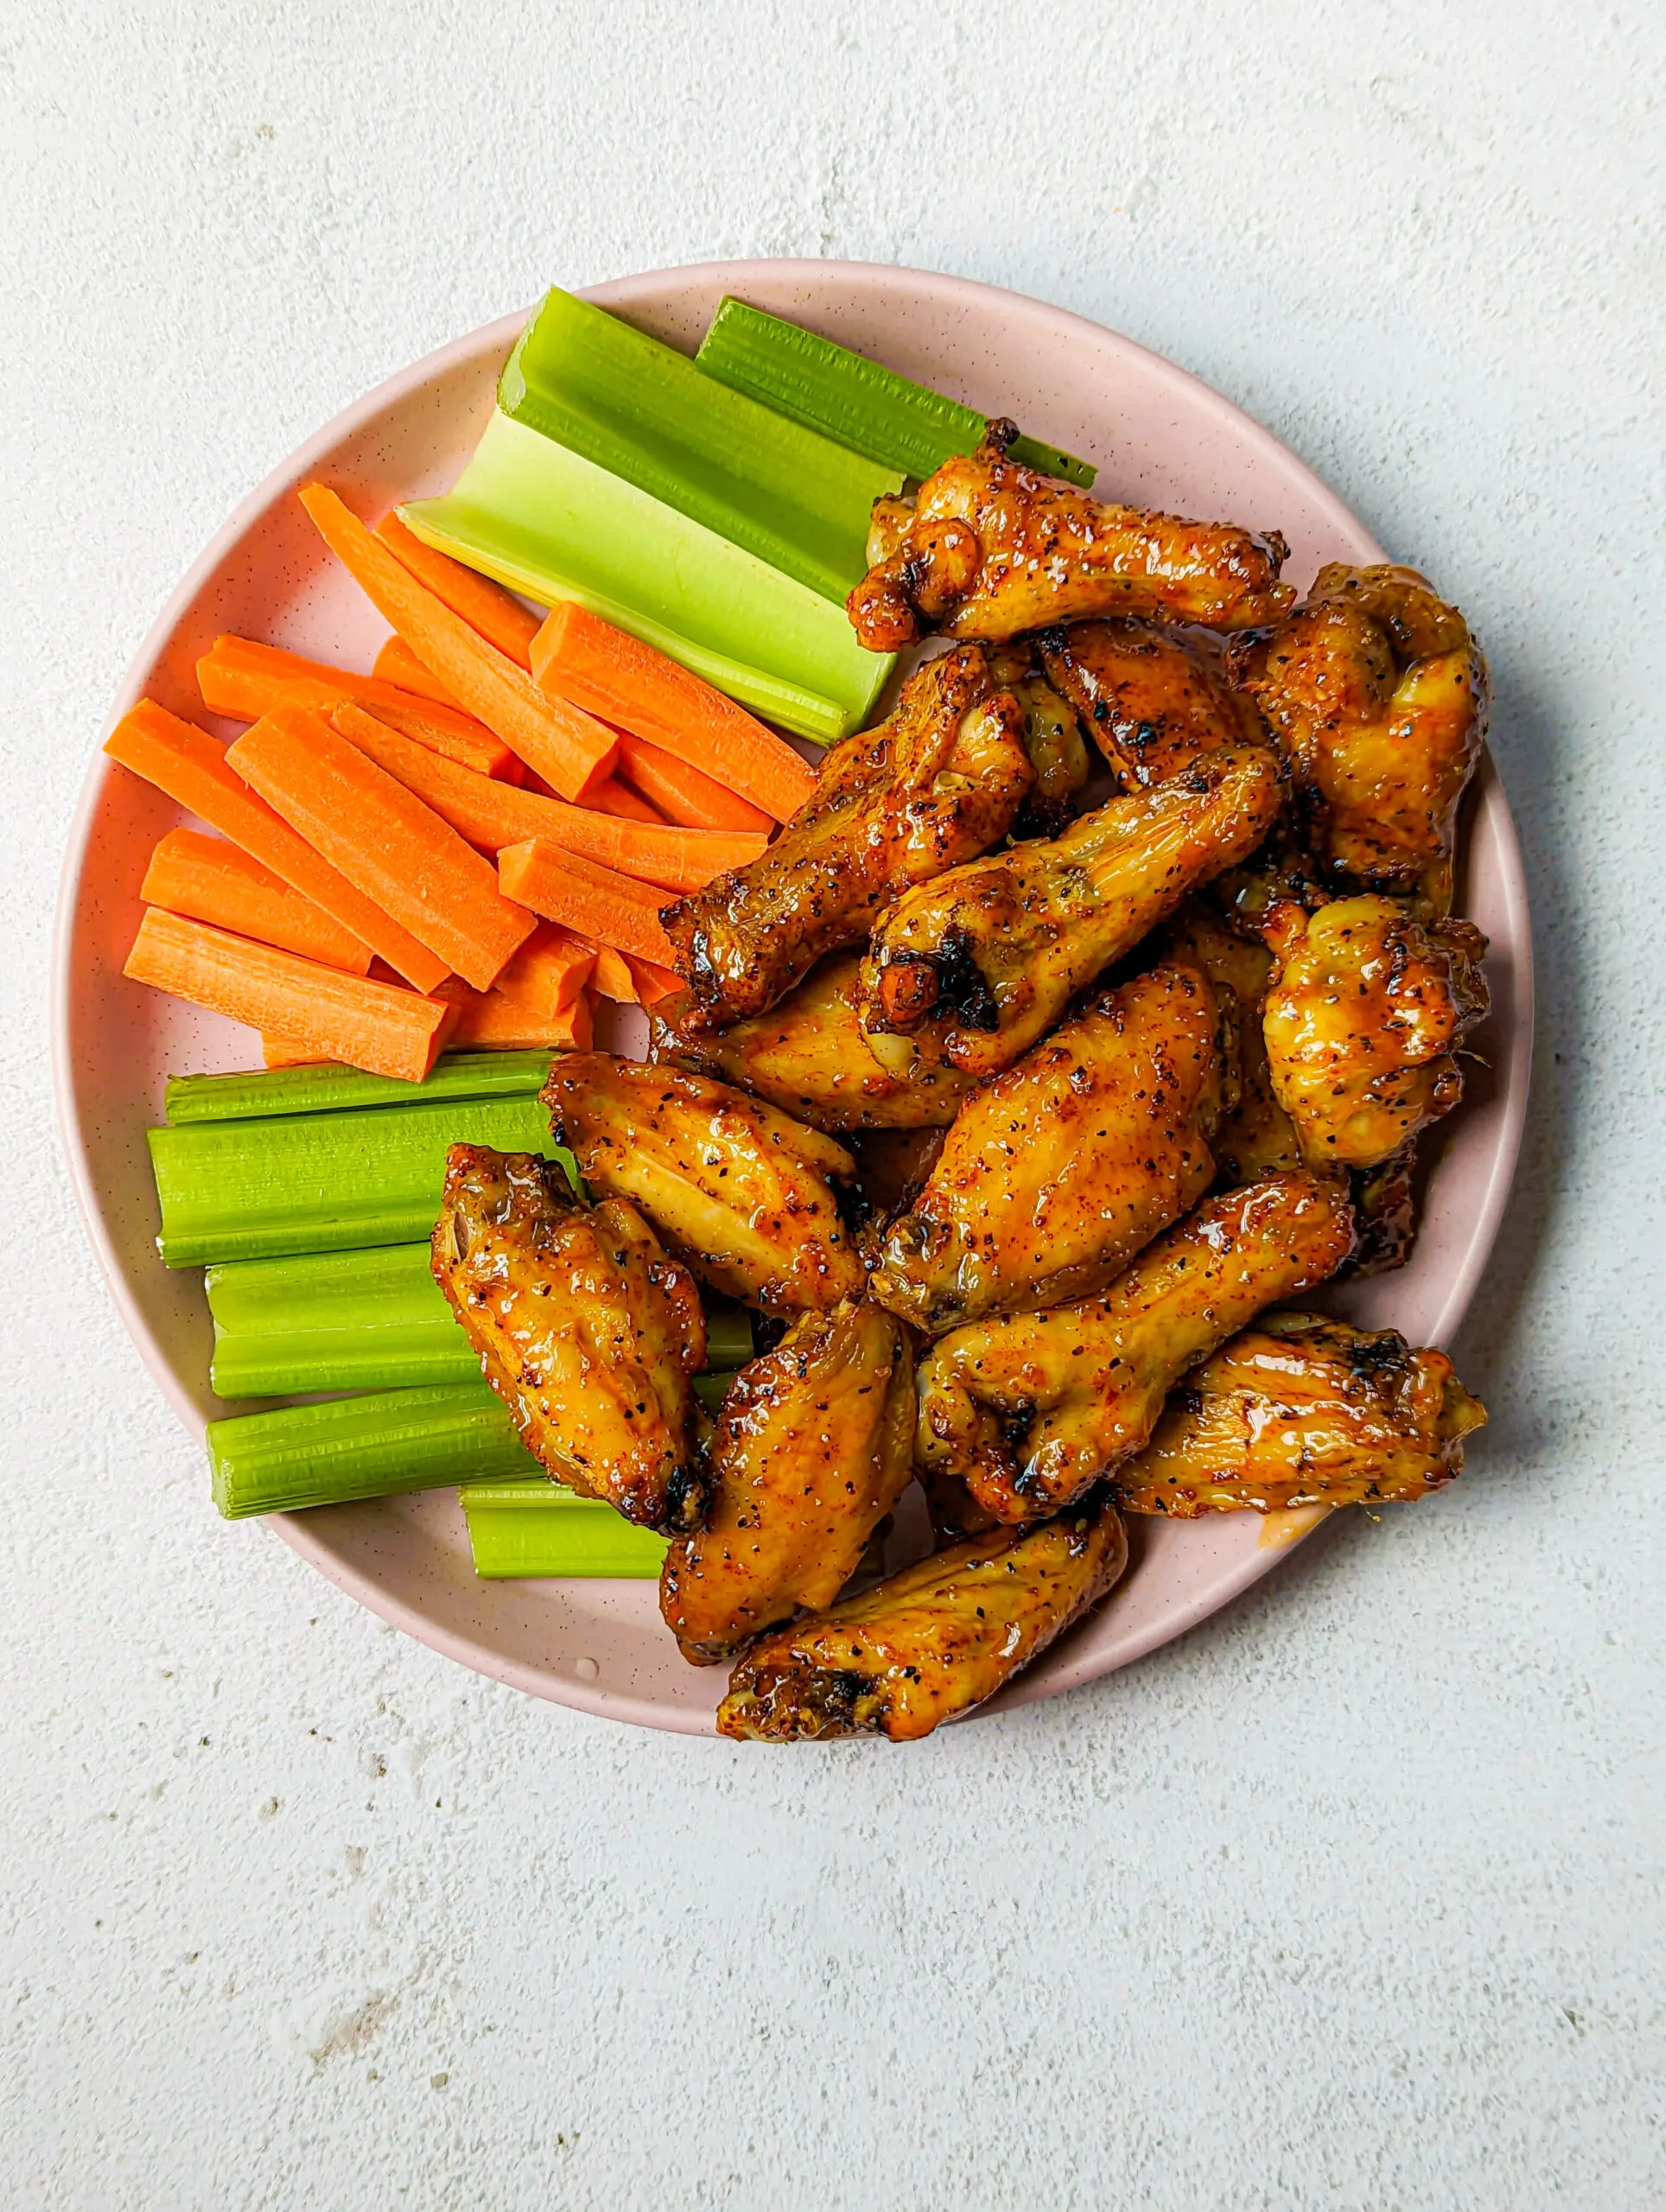 Hot honey lemon pepper chicken wings on a plate with vegetables.